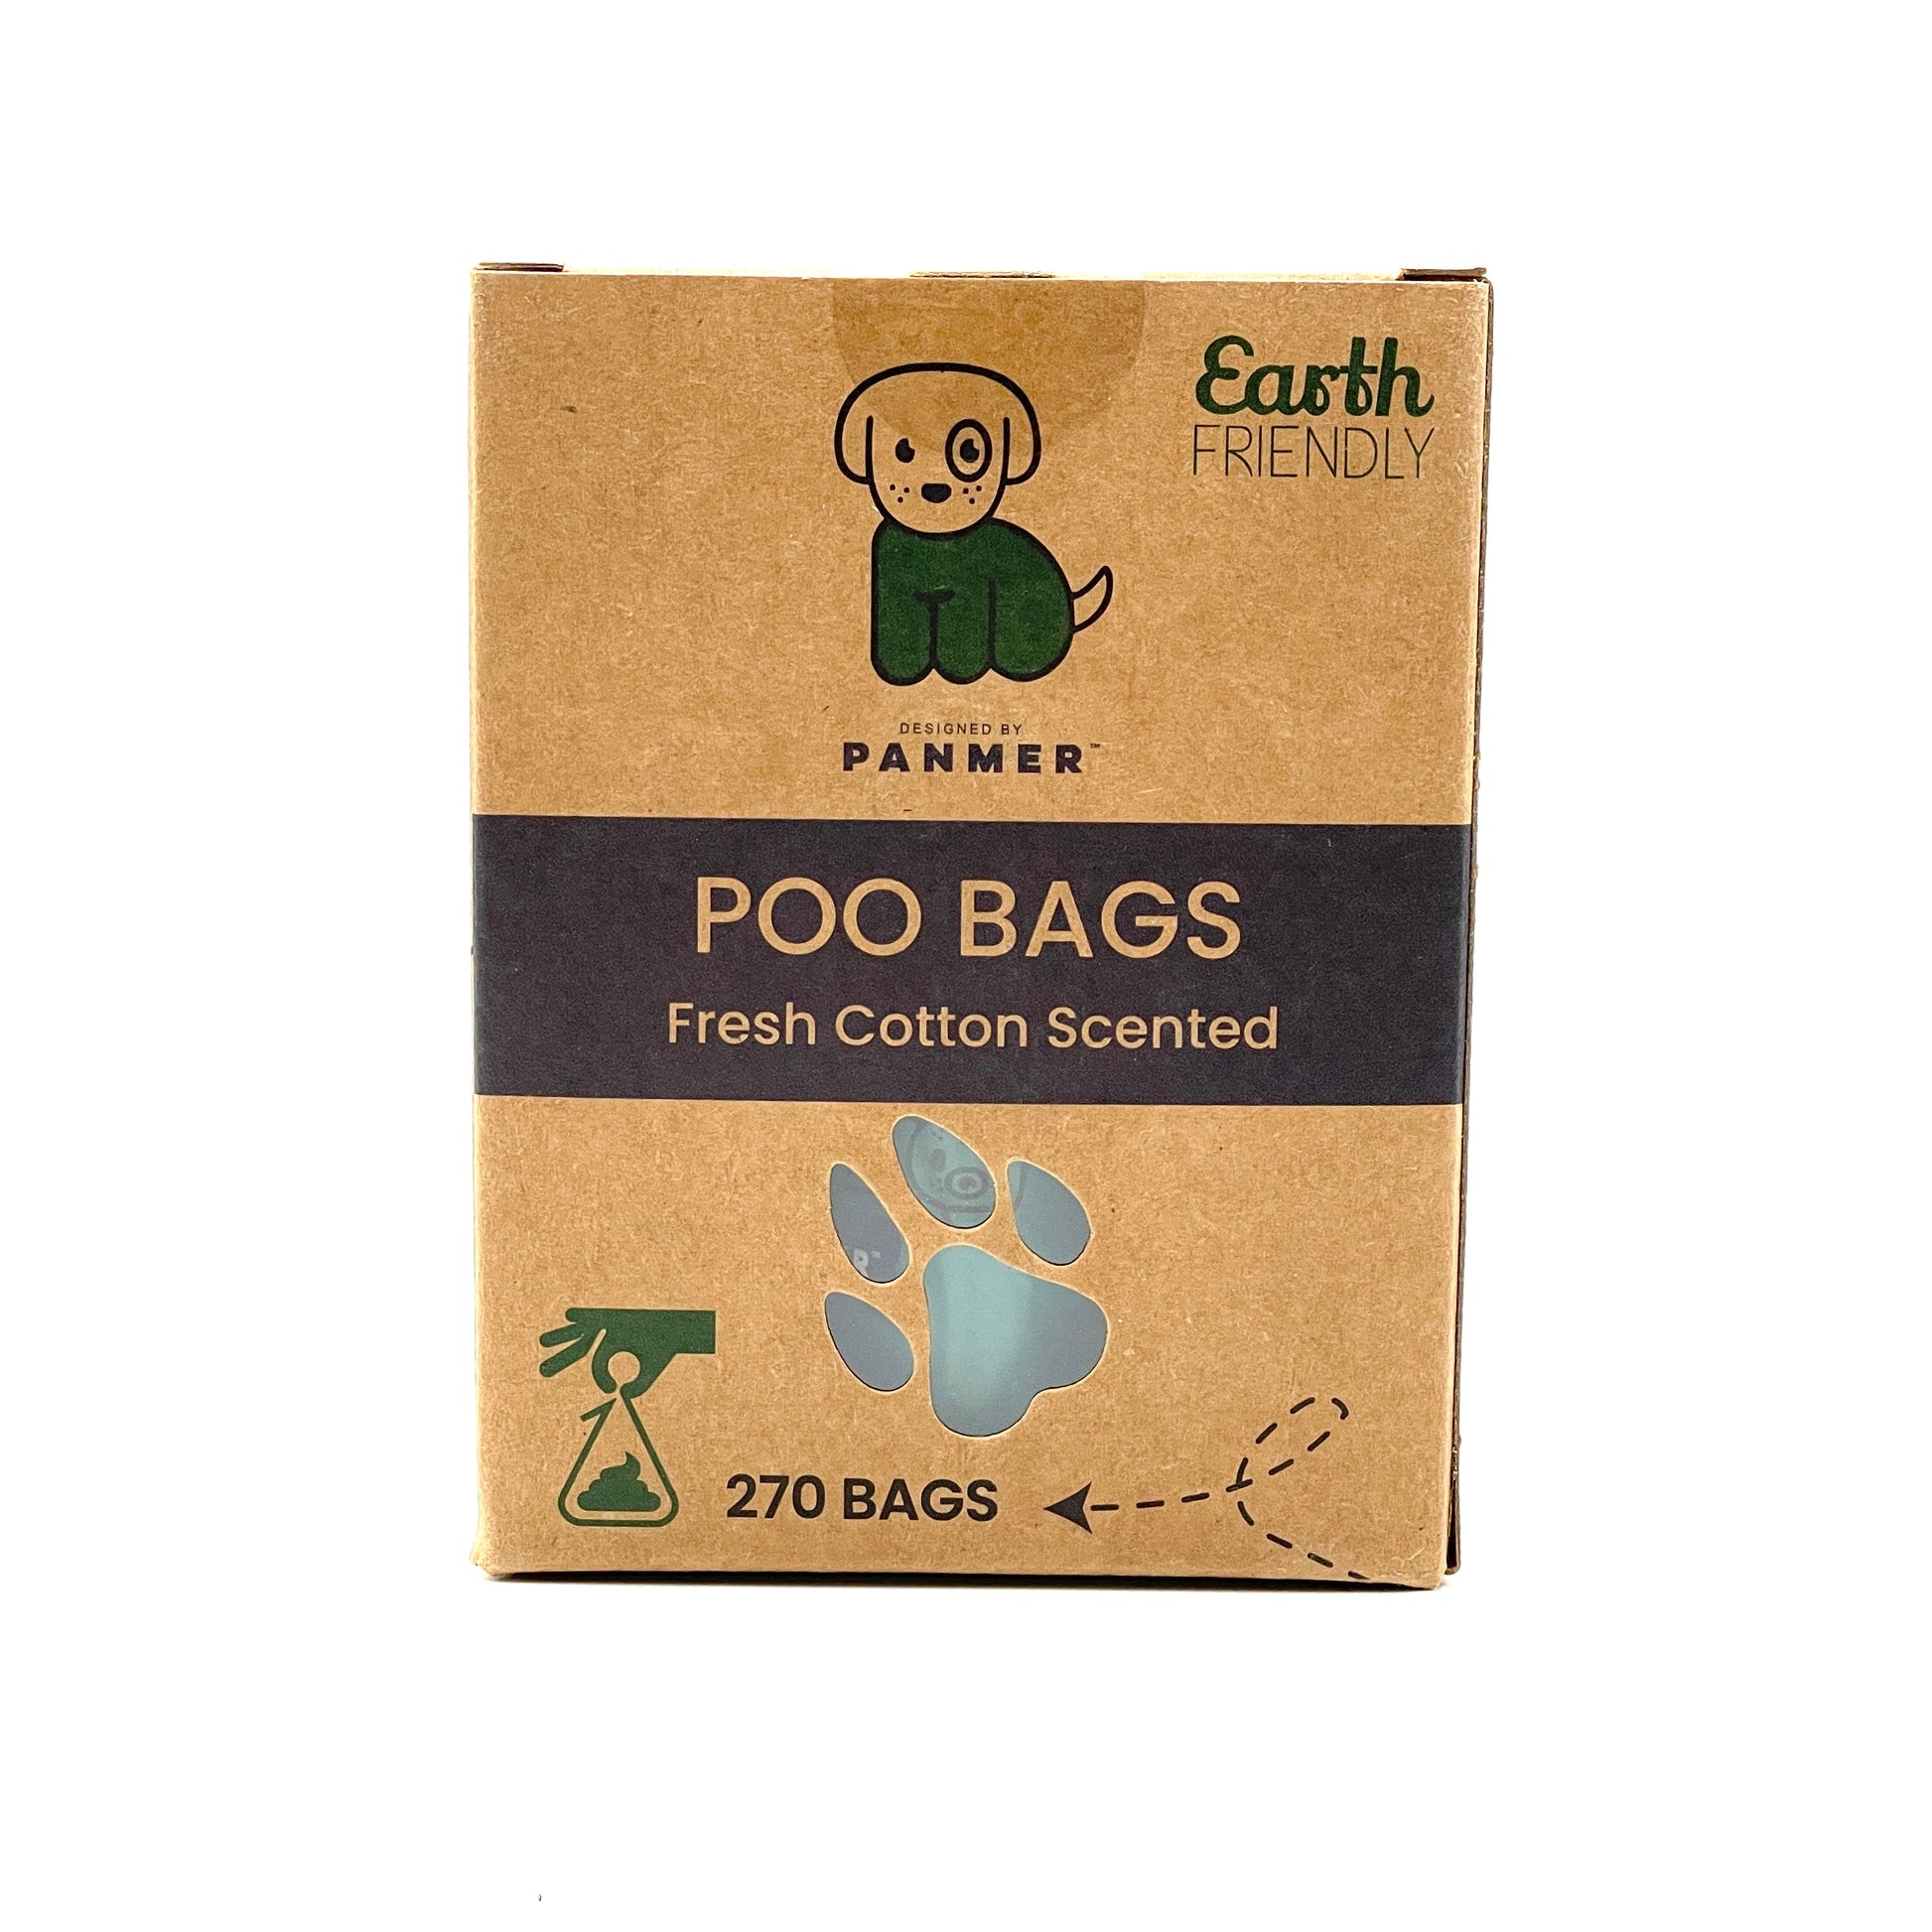 WHOLESALE – Poo Bags - PCR – Rolls – Cotton Fresh Scented – 270bags - #PCRPB270 - Pet Wipes & Poo Bags